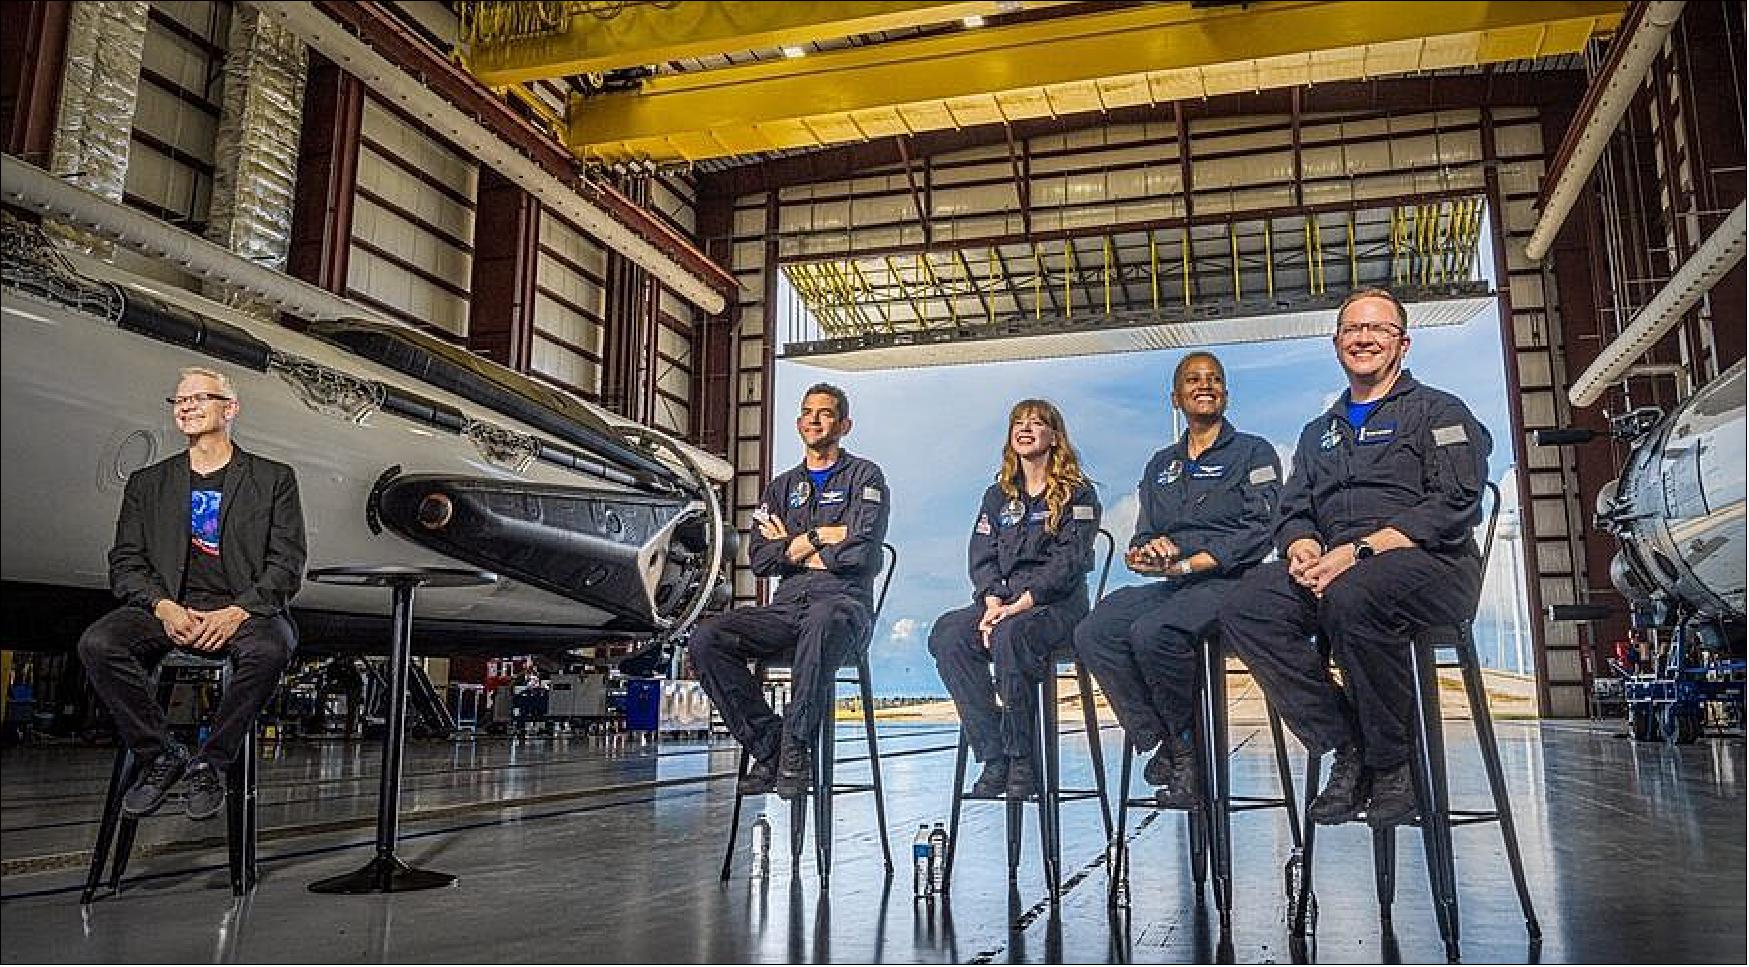 Figure 4: SpaceX's Benji Reed (left) and the Inspiration4 crew of Jared Isaacman, Hayley Arceneaux, Sian Proctor and Chris Sembroski discuss their upcoming mission at a Sept. 14 briefing (image credit: Inspiration4/John Kraus)